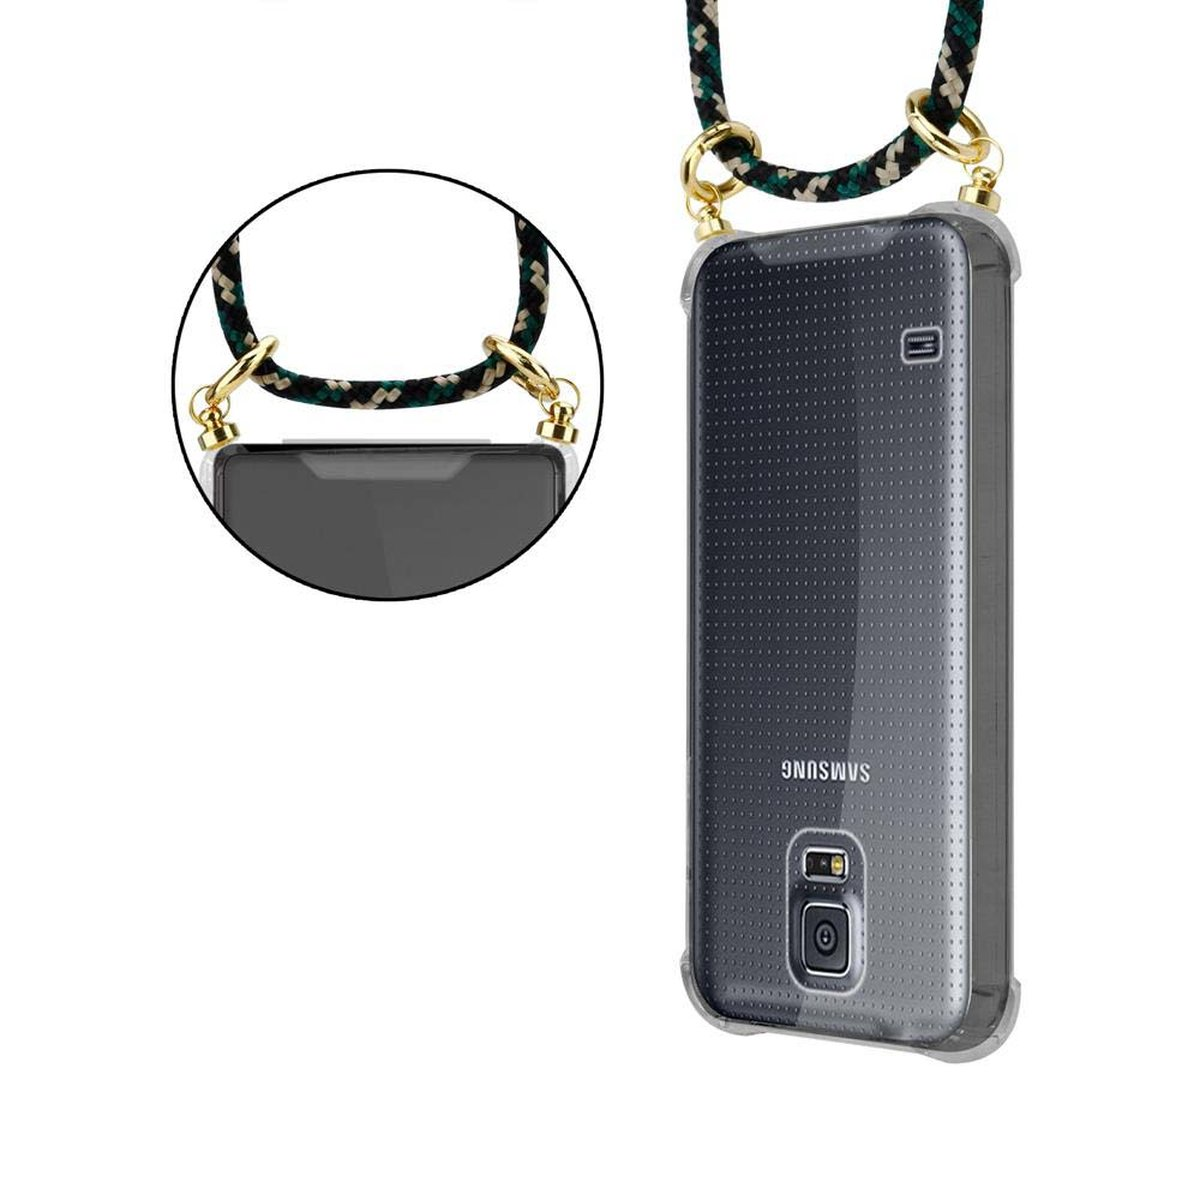 CADORABO Handy Kette mit Gold Band Kordel Samsung, S5 Galaxy Hülle, / NEO, und Ringen, abnehmbarer S5 CAMOUFLAGE Backcover